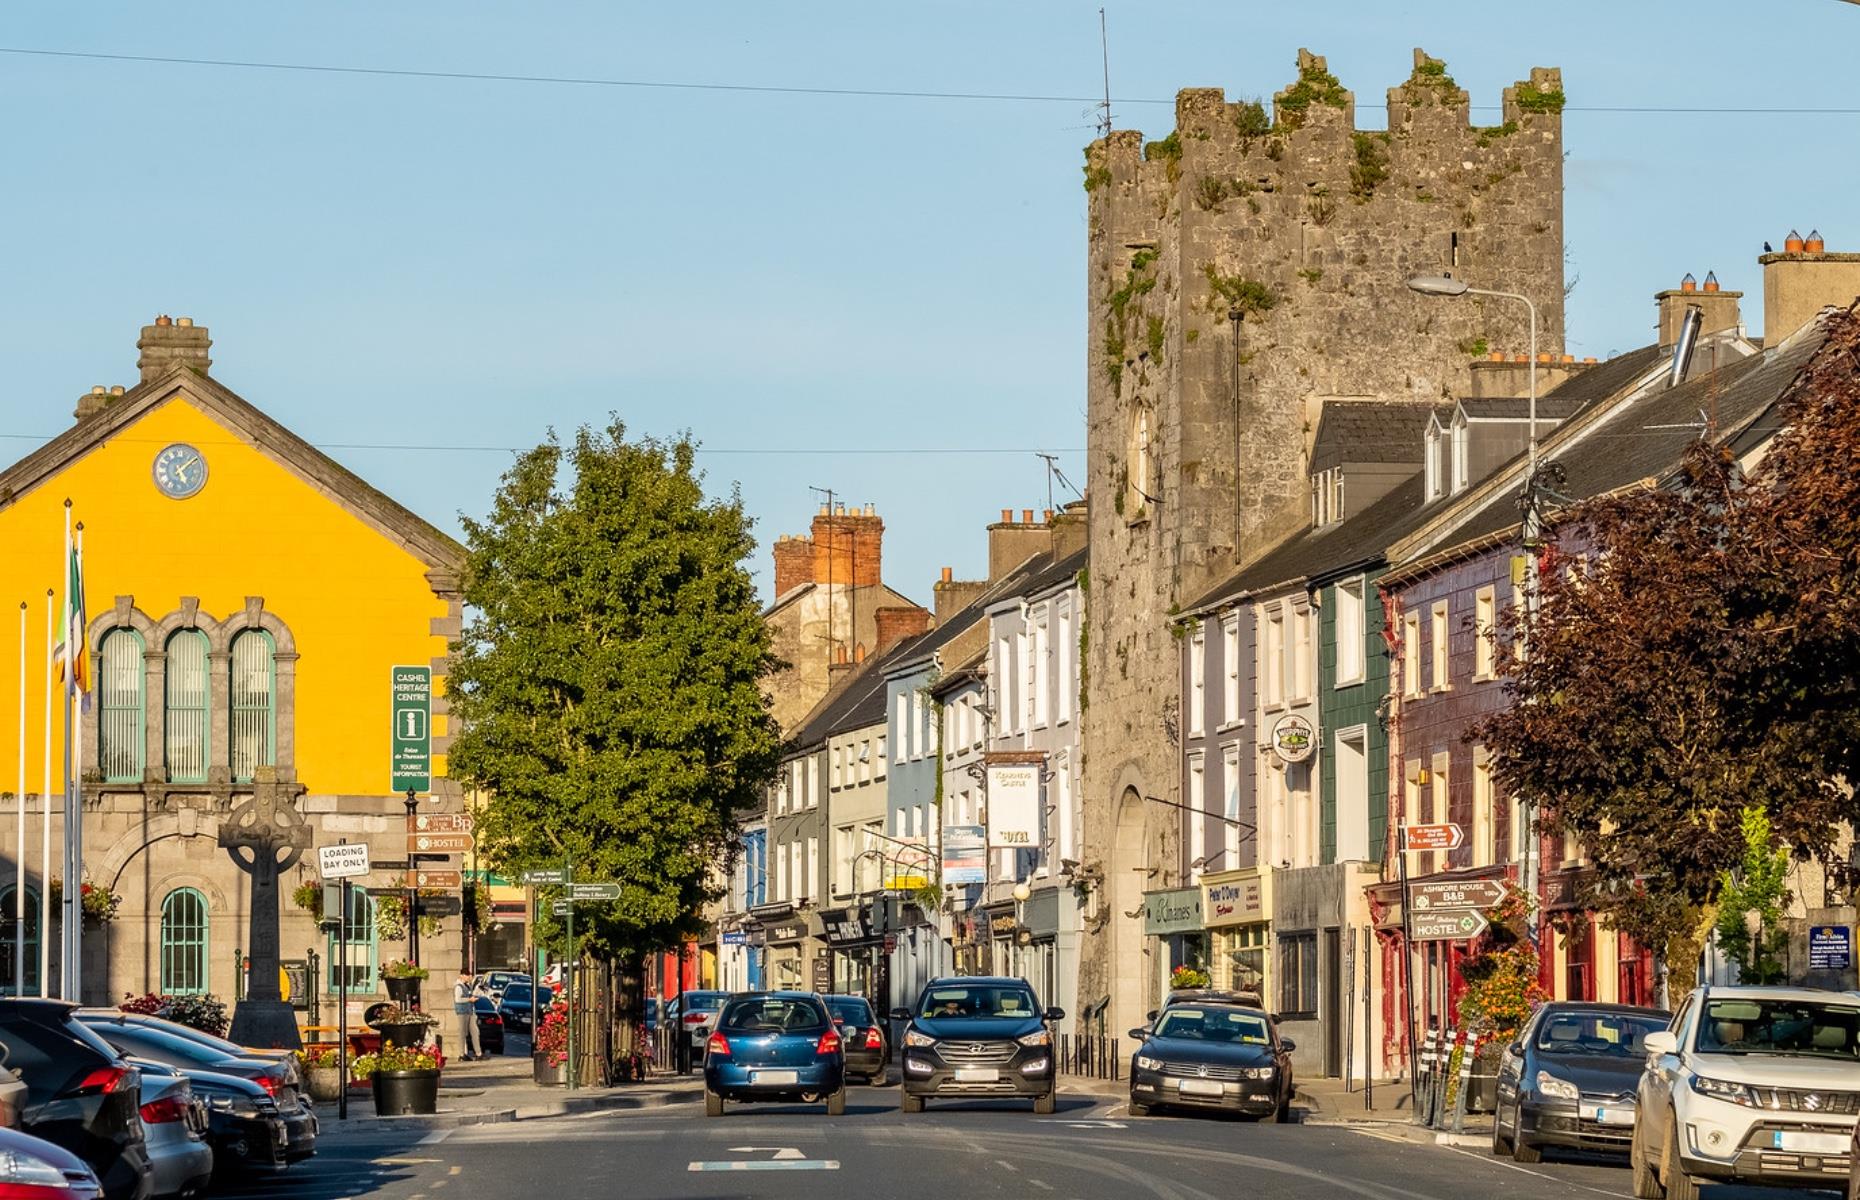 <p>An imposing archaeological site towers over this small southern Ireland town, which includes a Gothic cathedral, a round tower and a 15th-century castle. Fascinating museums nearby at Cashel Folk Village explore the Great Famine and the 1916 Easter Rising, while the Brú Ború cultural center hosts concerts and performances.</p>  <p><a href="https://www.facebook.com/loveexploringUK?utm_source=msn&utm_medium=social&utm_campaign=front"><strong>Love this? Follow our Facebook page for more travel inspiration</strong></a></p>